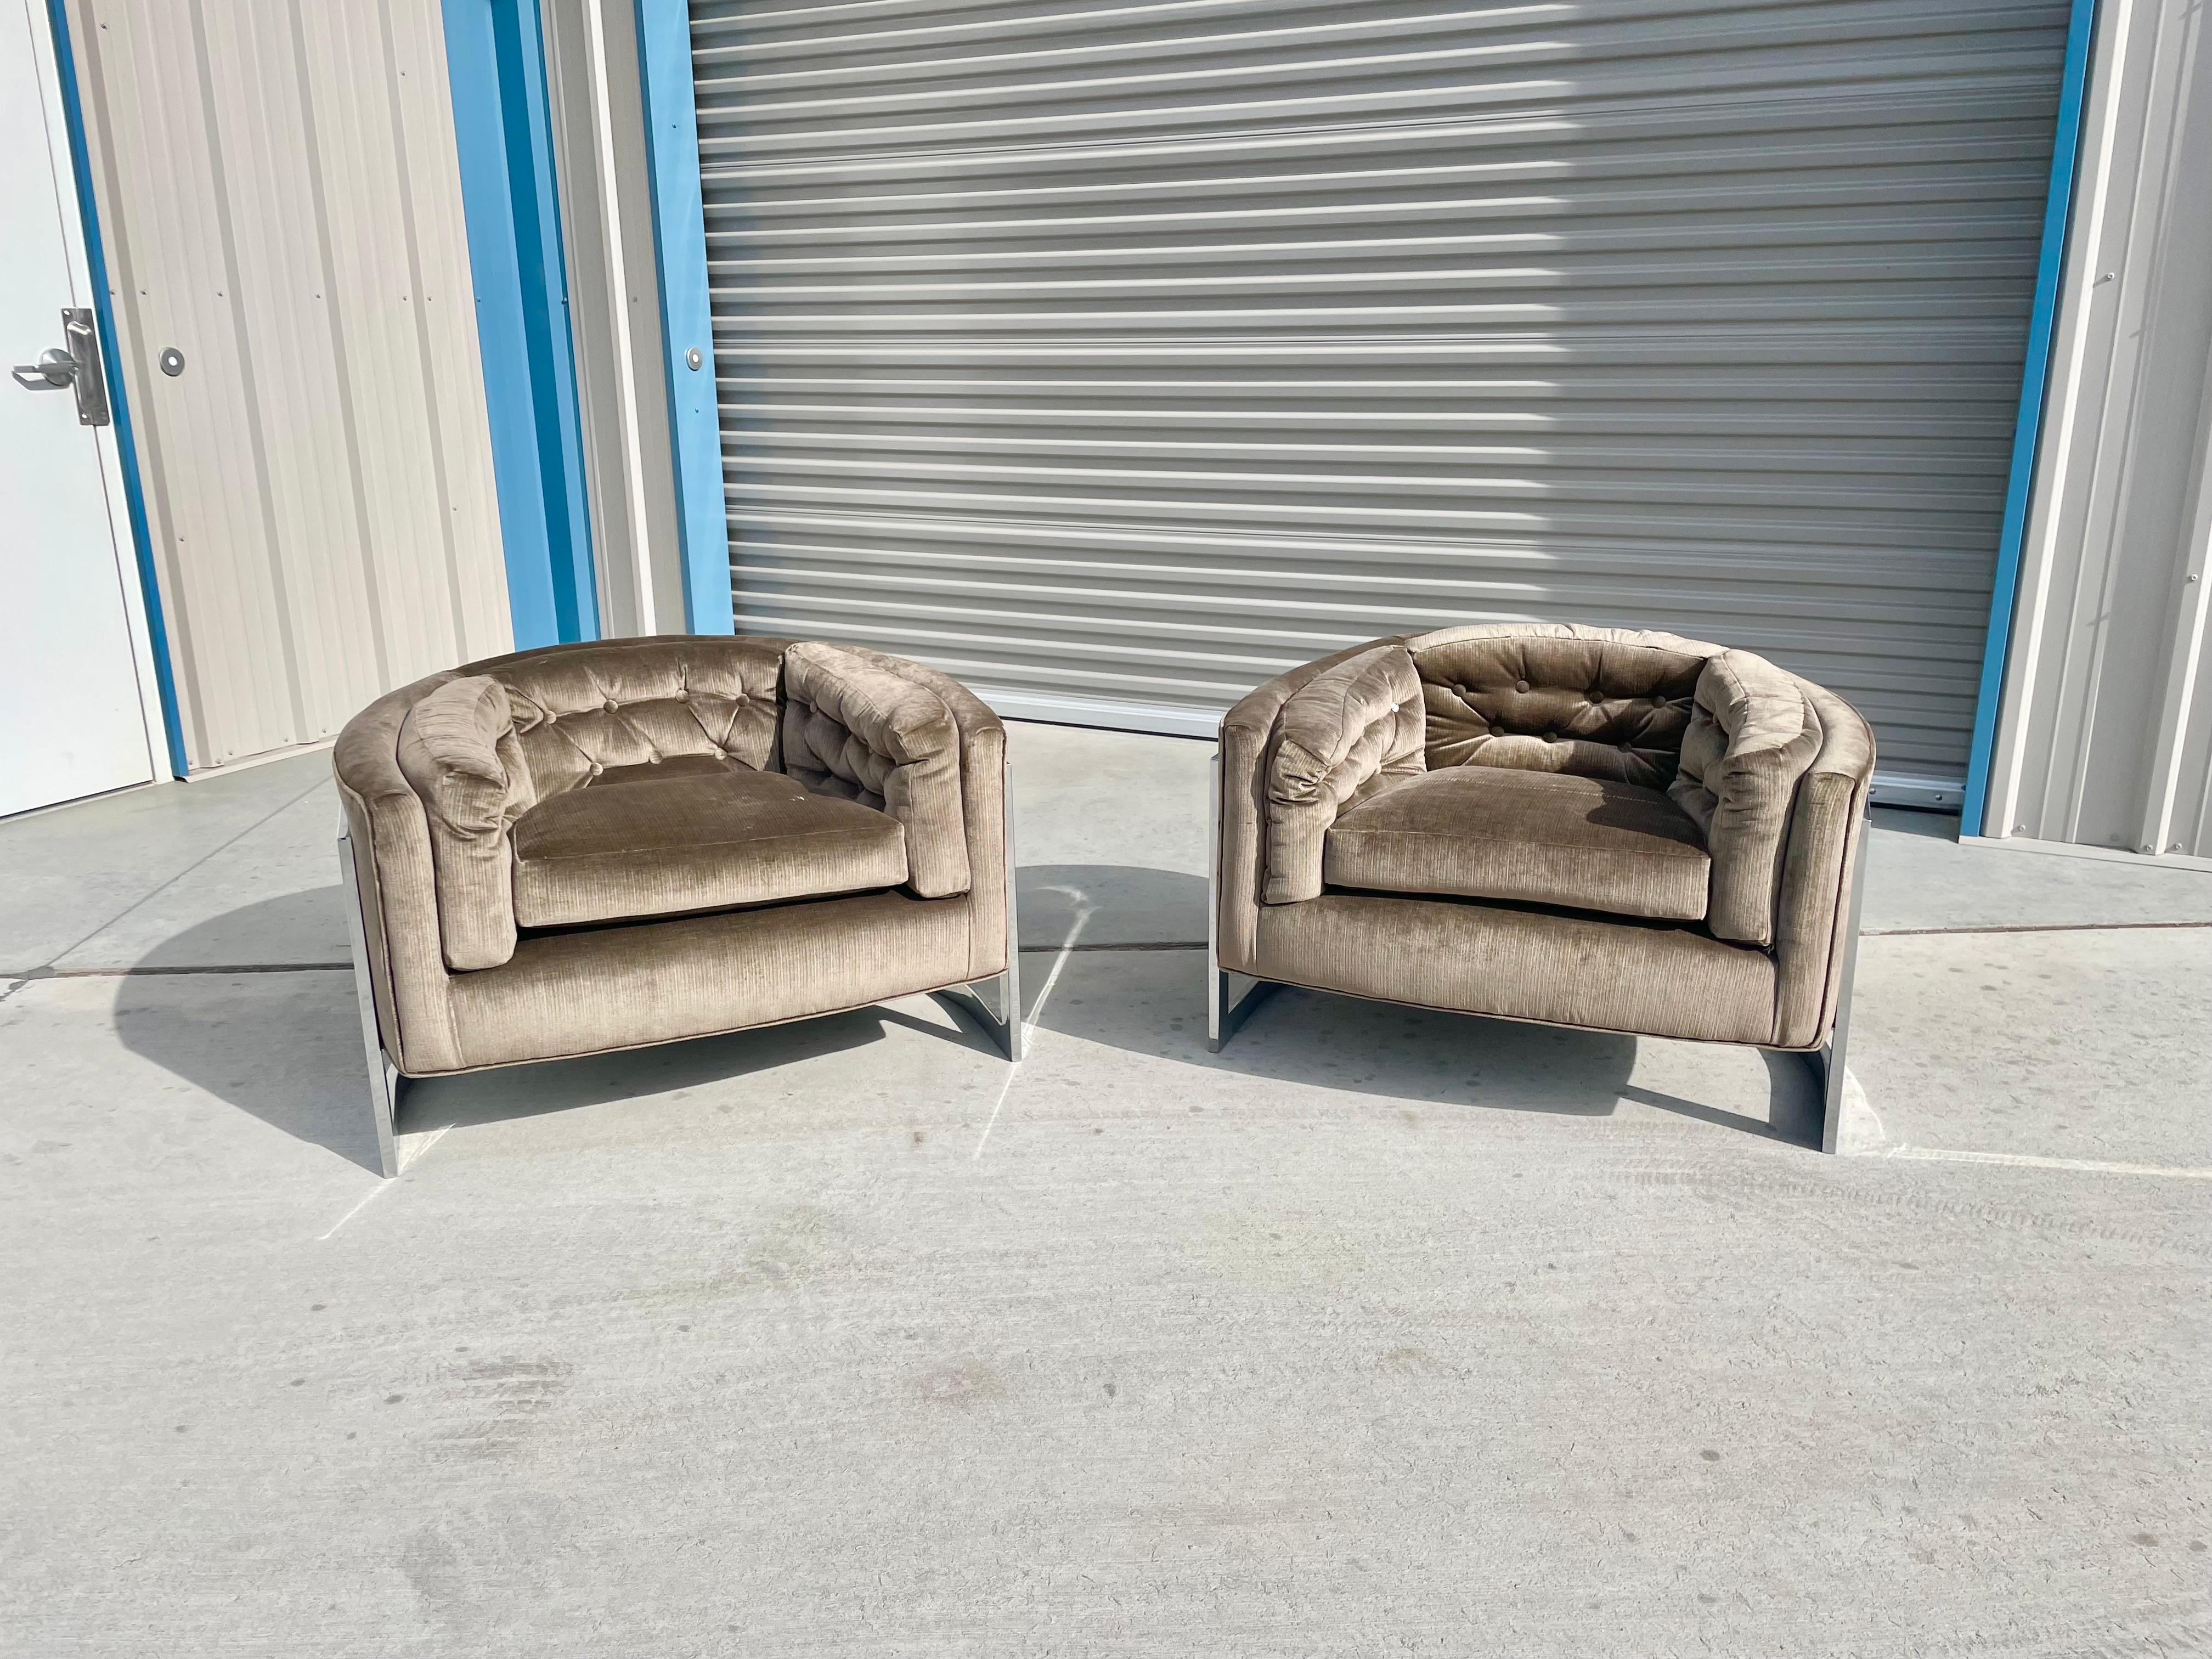 Midcentury Barrel lounge chairs designed by Jules Heumann for Metropolitan in the United States circa 1970s. This stunning pair of lounge chairs feature a barrel shape design on top of a chrome base wrapped around the seat, giving you the illusion